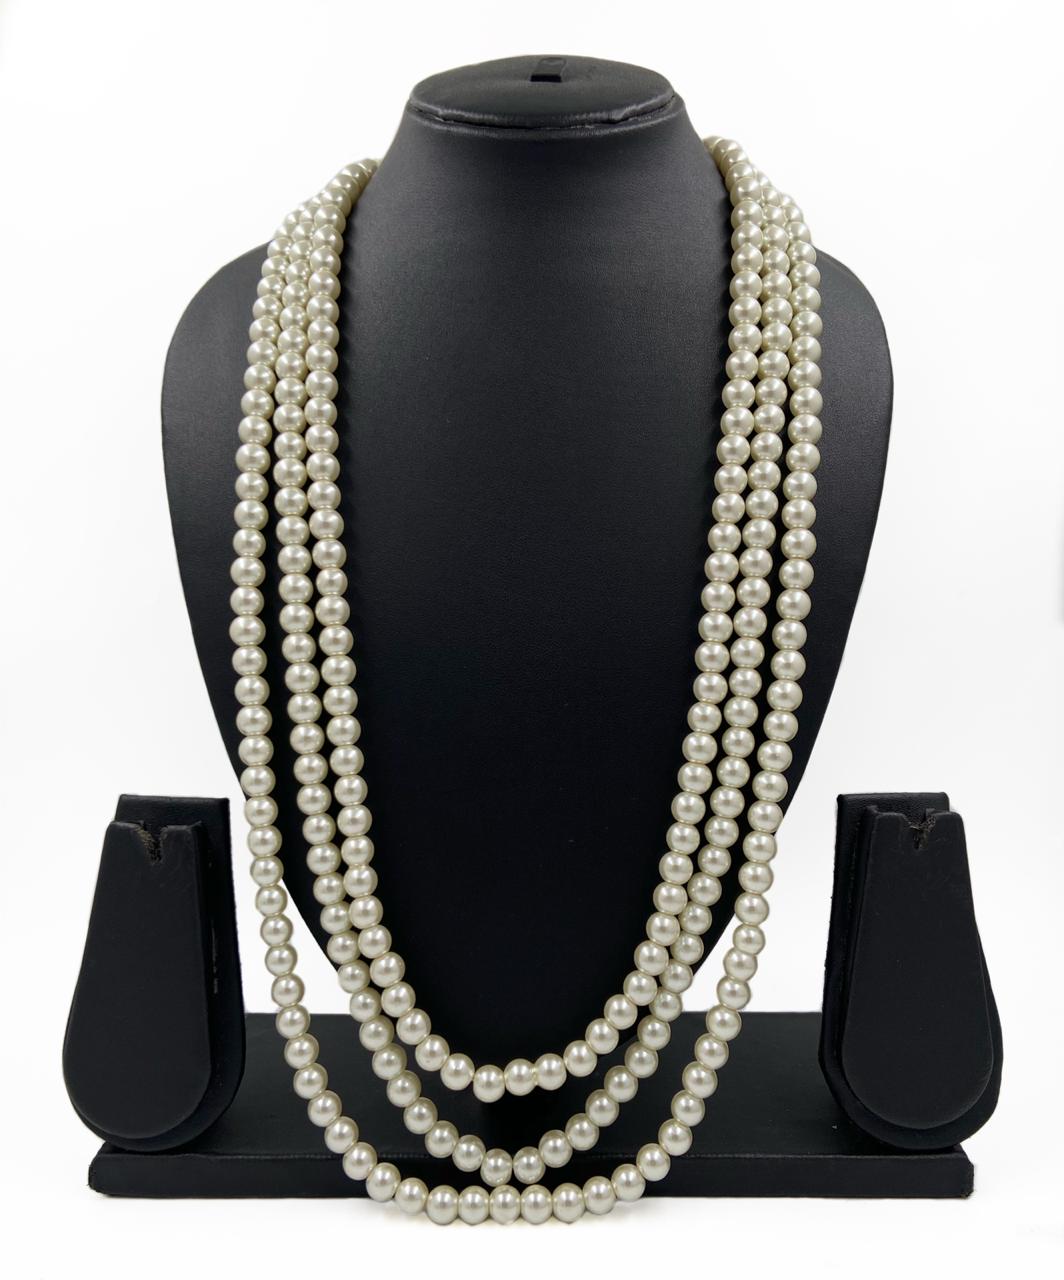 Grooms Triple layered White Pearl Beads Necklace For Men Beads Jewellery